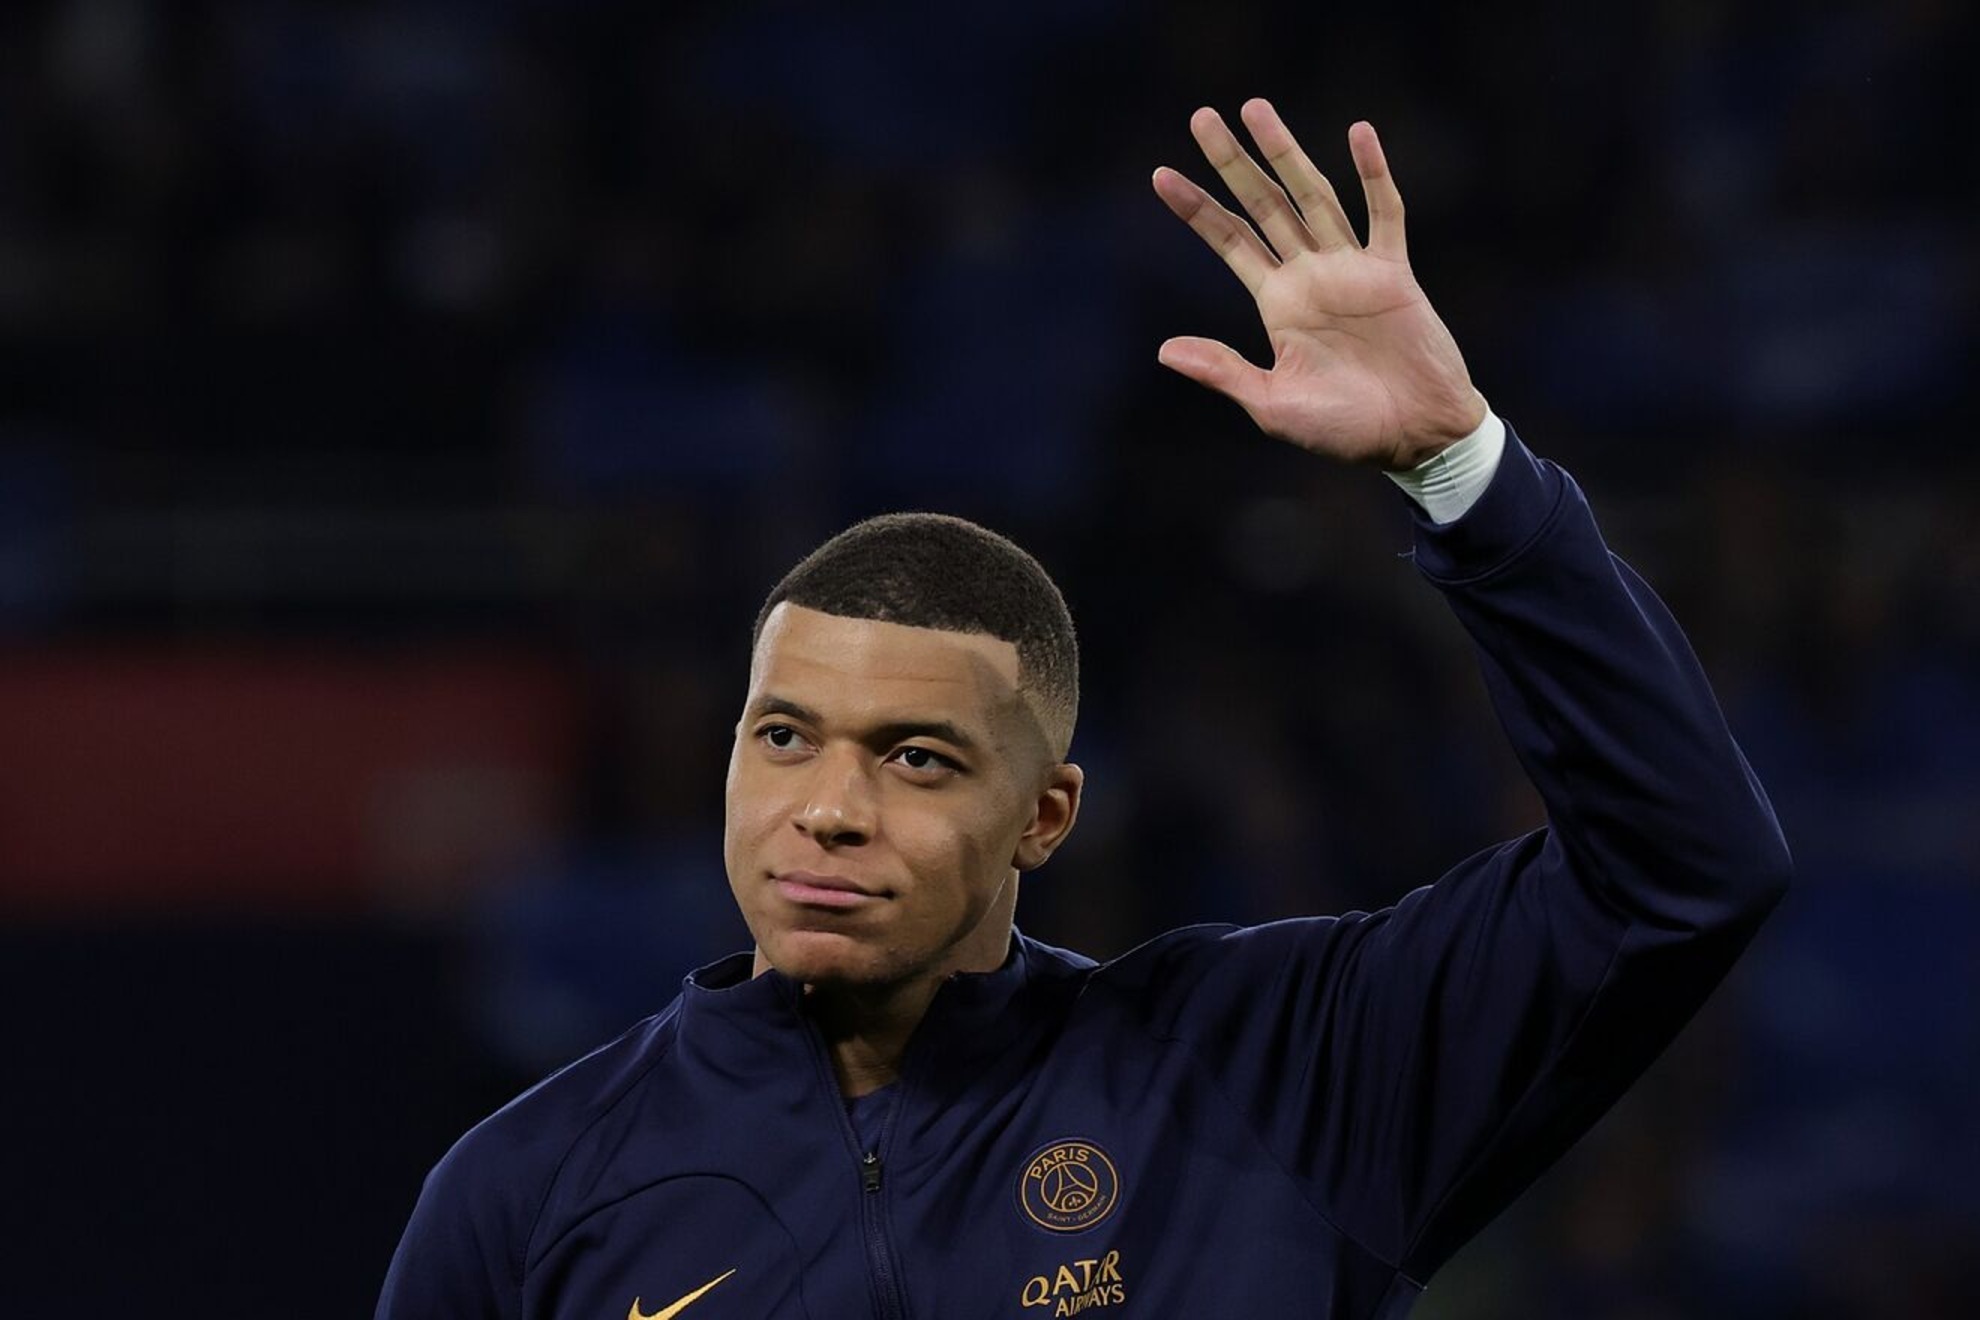 Kylian Mbappe waves to fans before the match against Real Sociedad